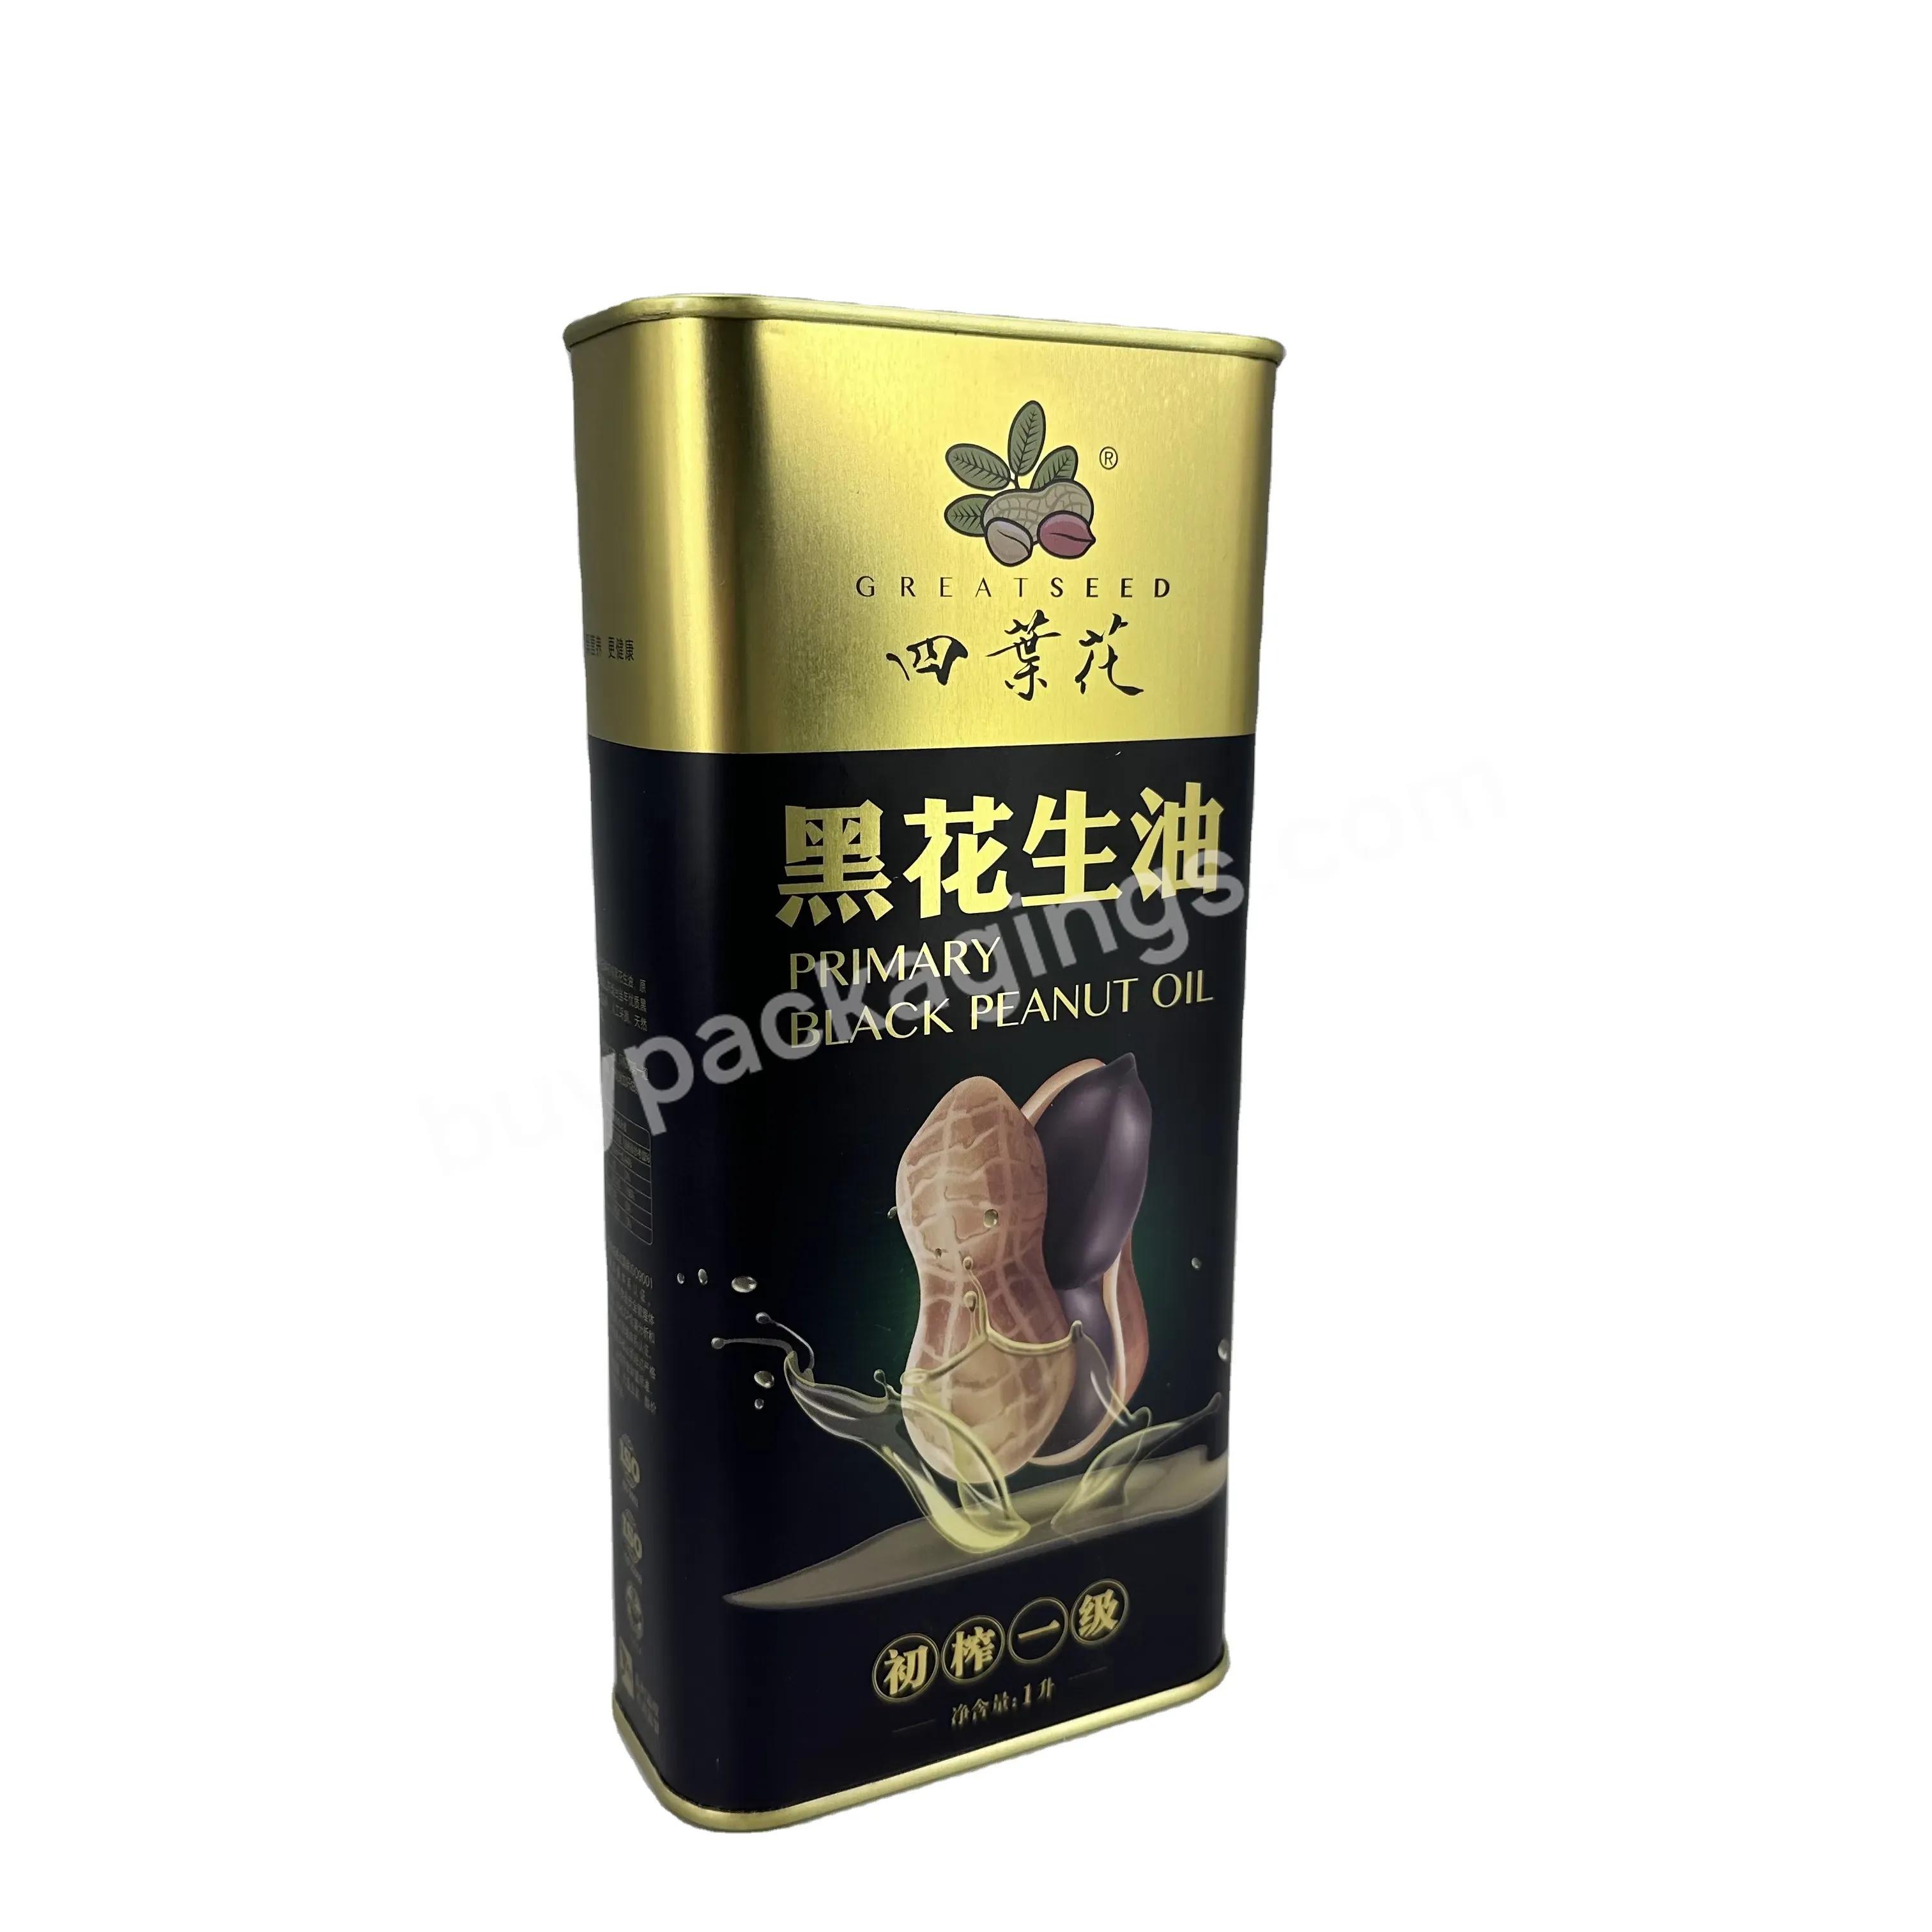 Wholesale High Quality 1l Empty Tin Oil Can Food Grade Olive Oil Tin Packing With Plastic Spout Lid For Food Oil - Buy High Quality 1l Empty Tin Oil Can,Food Grade Olive Oil Tin Packing,With Plastic Spout Lid For Food Oil.